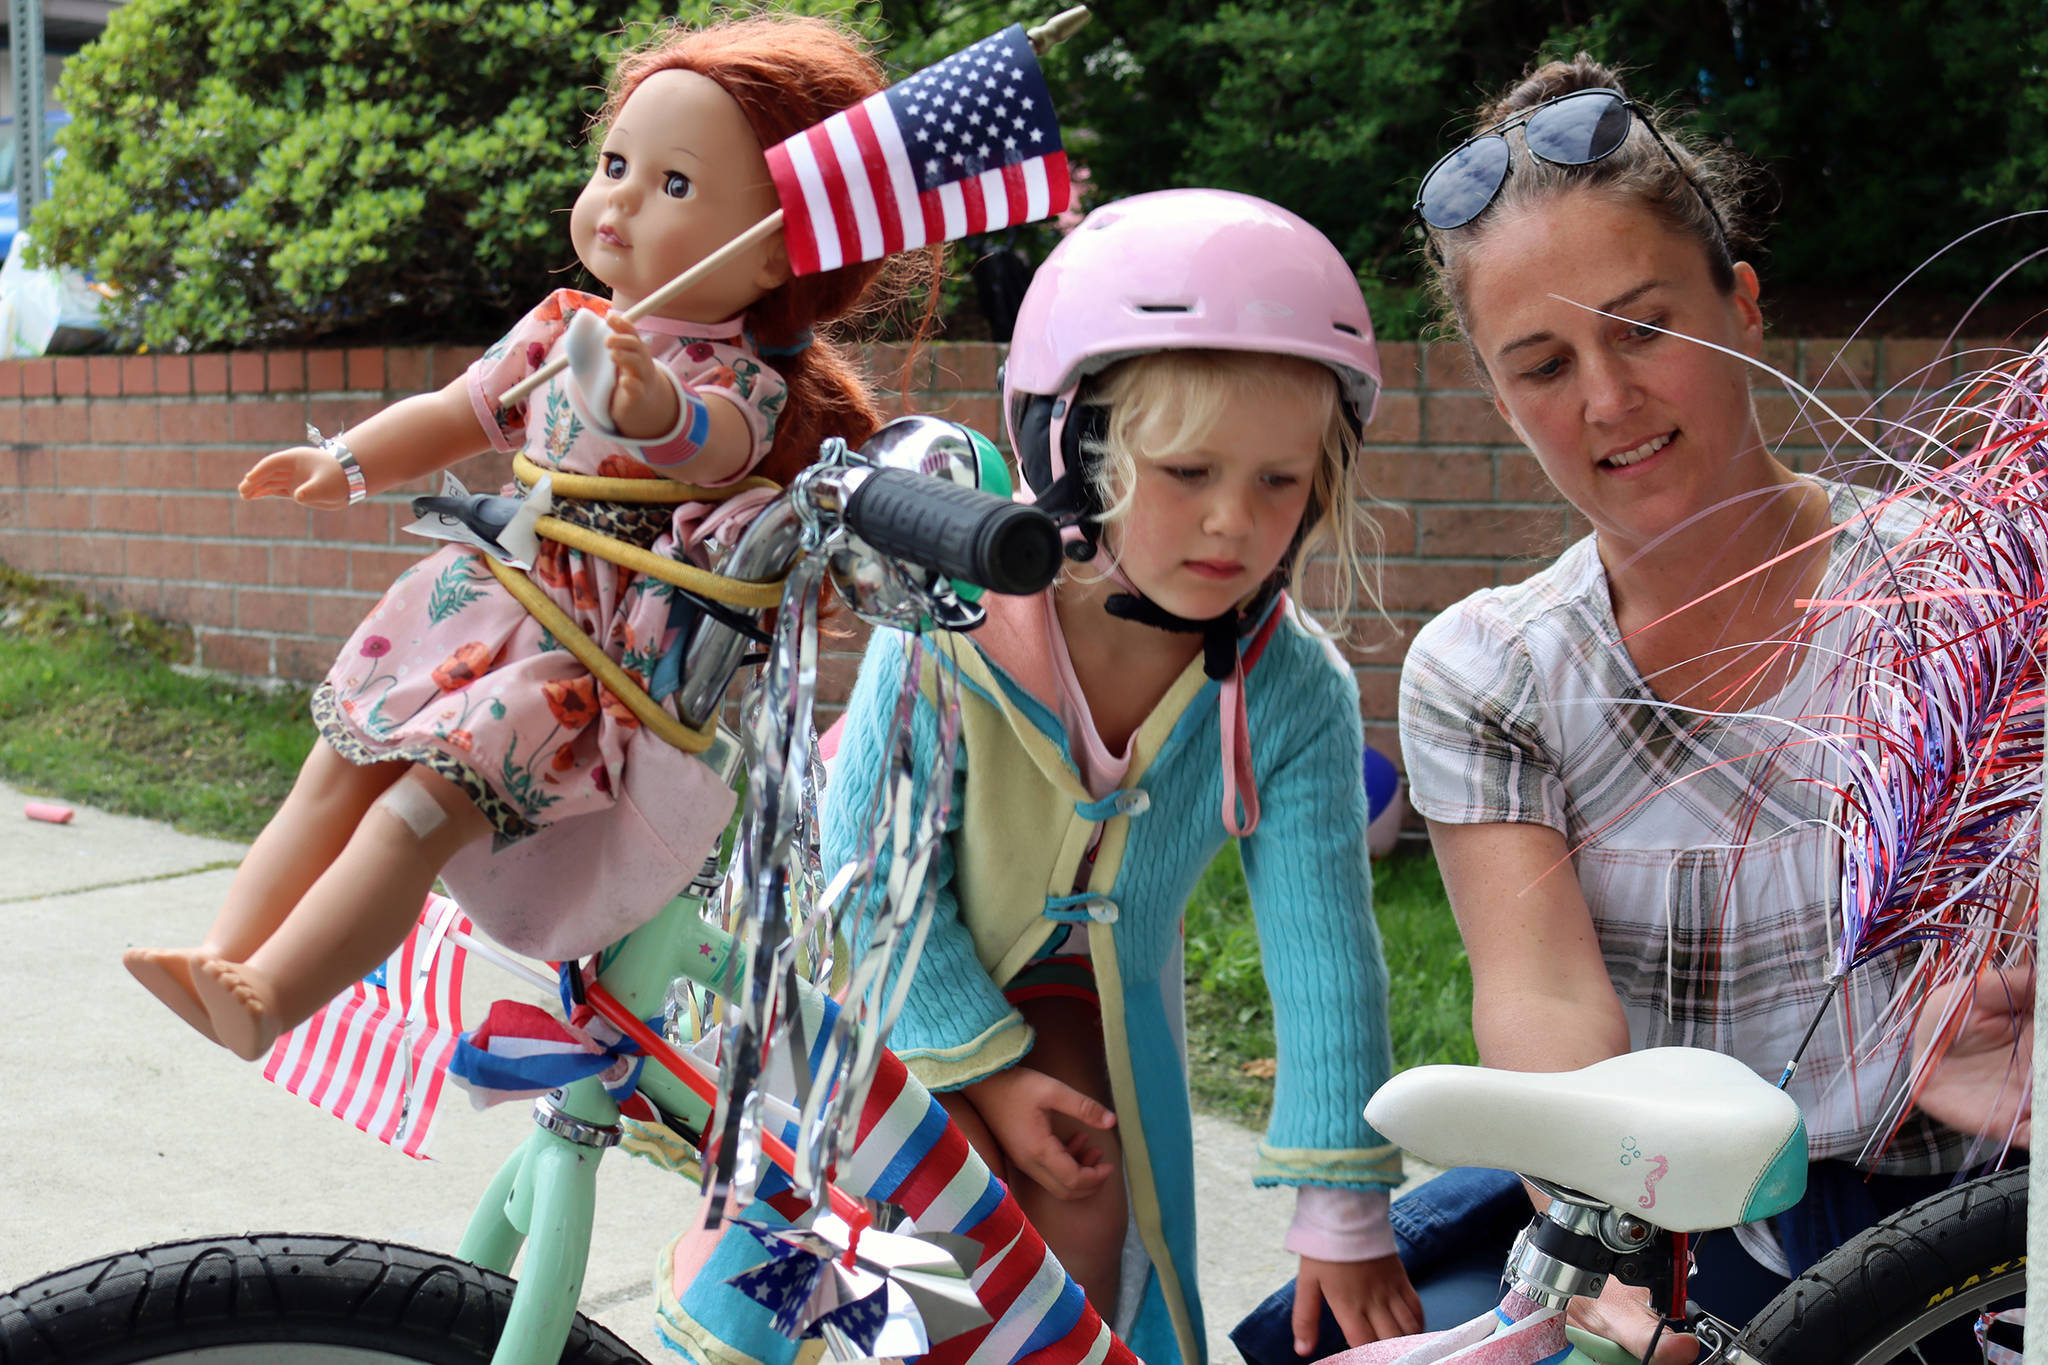 Imogen Resneck, 4, and Jamie Buehner finish up decorating a bike outside the Douglas Public Library on July 3, 2021. Resneck's doll, Robbie, was bound to the bike like an amber-haired figurehead because "she wanted to go to the parade," Resneck said. (Ben Hohenstatt / Juneau Empire)